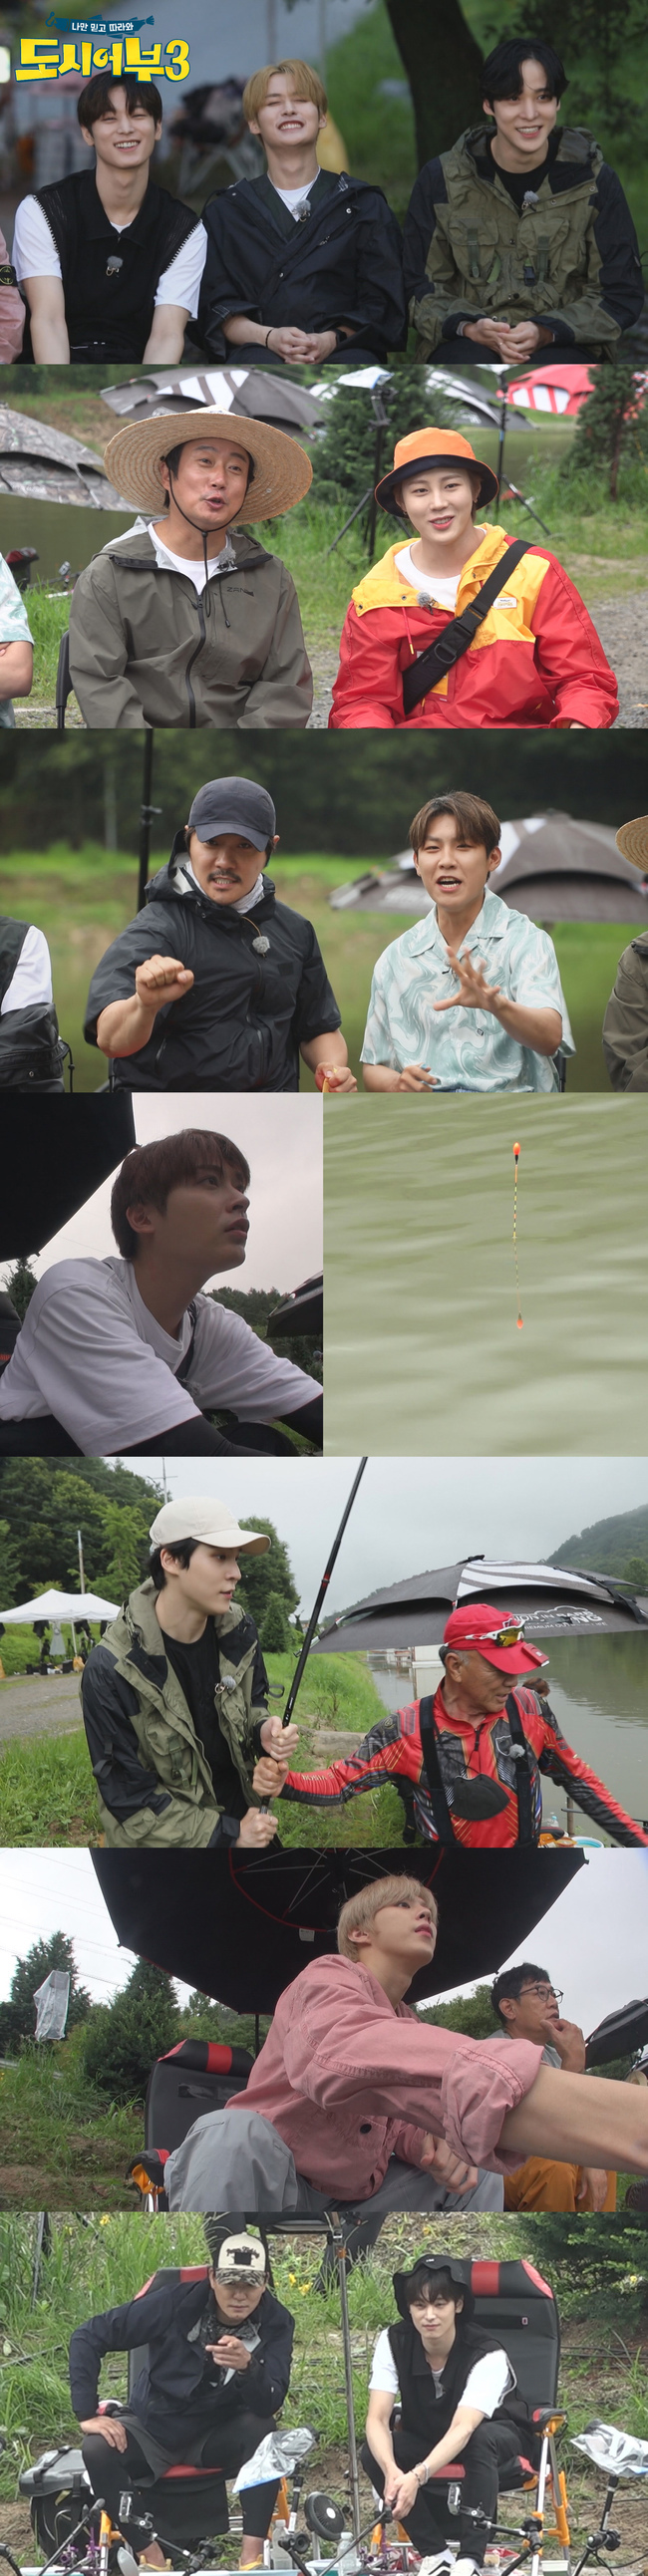 Seven Idols will be on the City Fishermen 3 team.The 15th episode of Channel A entertainment program, Follow Me Only, and City Fishery Season 3 (hereinafter referred to as City Fishery 3), which will be broadcast on August 12, will host the Fresh Carp Youth Fishing Competition.In the Scent Carp Youth Fishing Competition, Blockbee Jaehyo, Ha Sung-woon, Kim Woo-seok, AB6IX Park Woo-jin, The Boyz Main actor, Stray Kids Reno and ETiz Yoonho will appear as guests.On this day, the city fishermen pair with Idol to set a unique team name, boasting a breathtaking breath and playing fishing.Lee Kyung-gyu, who teamed up with Kim Woo-suk, said, Woo Seok and I are related to each other. Kim Woo-suk replied, How is your sister?On the other hand, follower Kim Jin-woo was in danger of being glazed by Idol fans with an unwitting hit.I will have a lot of bad courier service when I go home. I was embarrassed to hear Lee Soo-geuns eerie warning.On the other hand, Ha Sung-woon, who has been full of fishing equipment, has expressed his expectation for this game and has announced a hot battle with his neighbor Lee Soo-geun.The fishing enthusiast Jae Hyo, who enjoys sea fishing, also amplifies the curiosity about this broadcast whether he can succeed in establishing himself as a fishing stone.